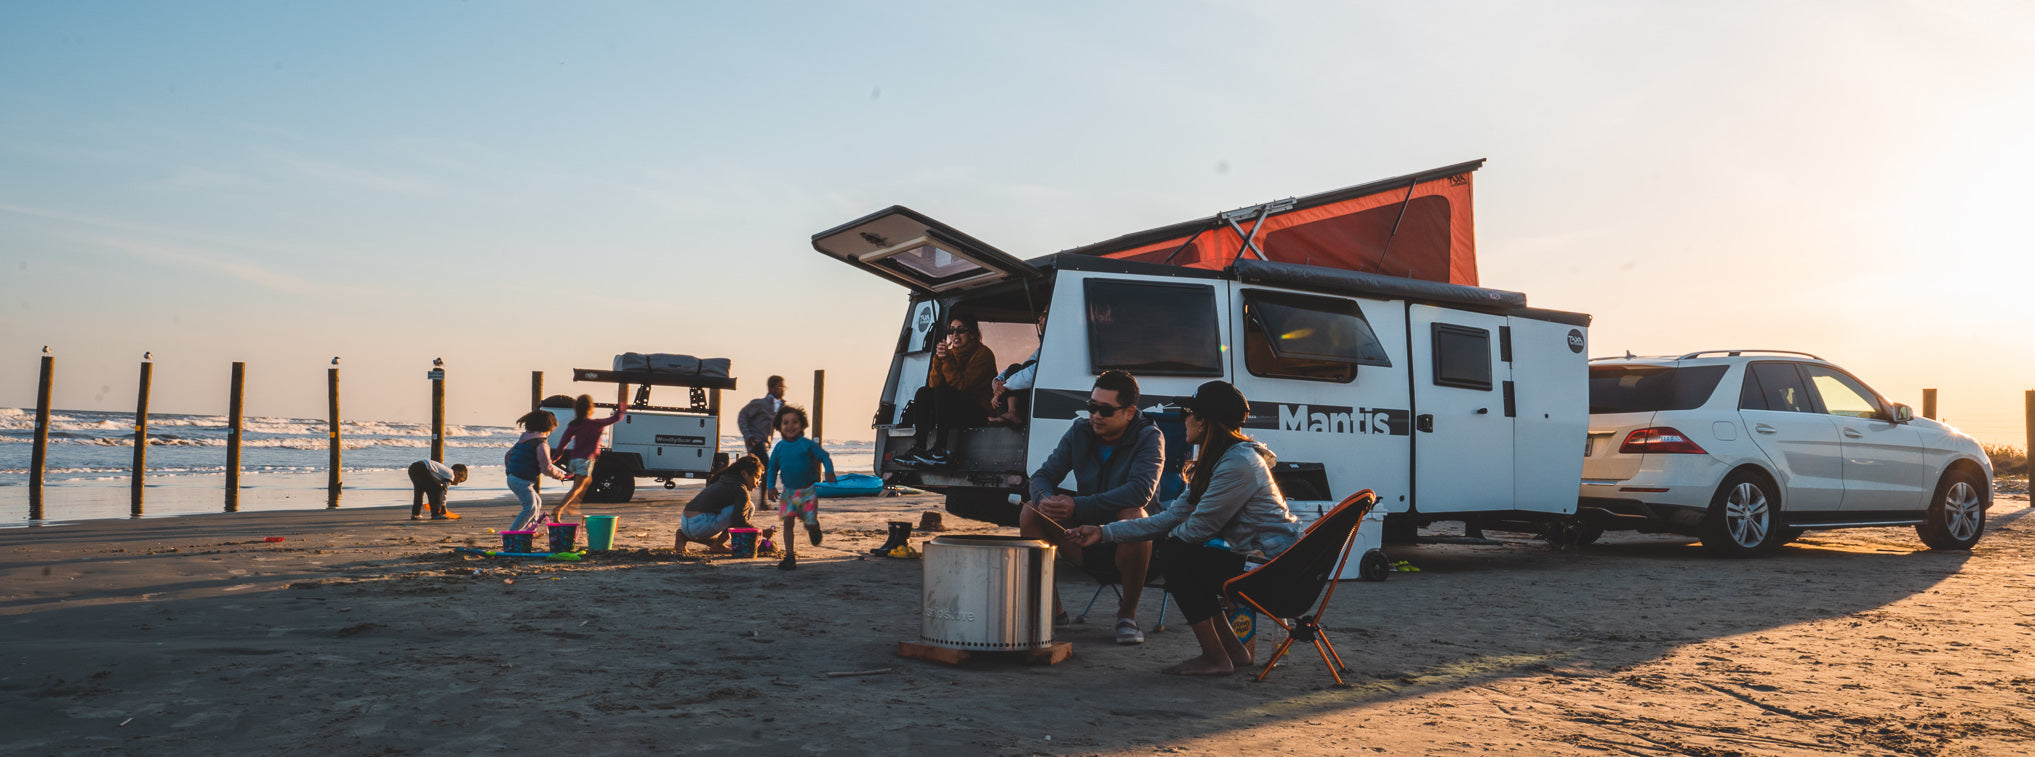 Top 10 Campsites Close to Los Angeles to Take Your TAXA for a Quick Getaway!